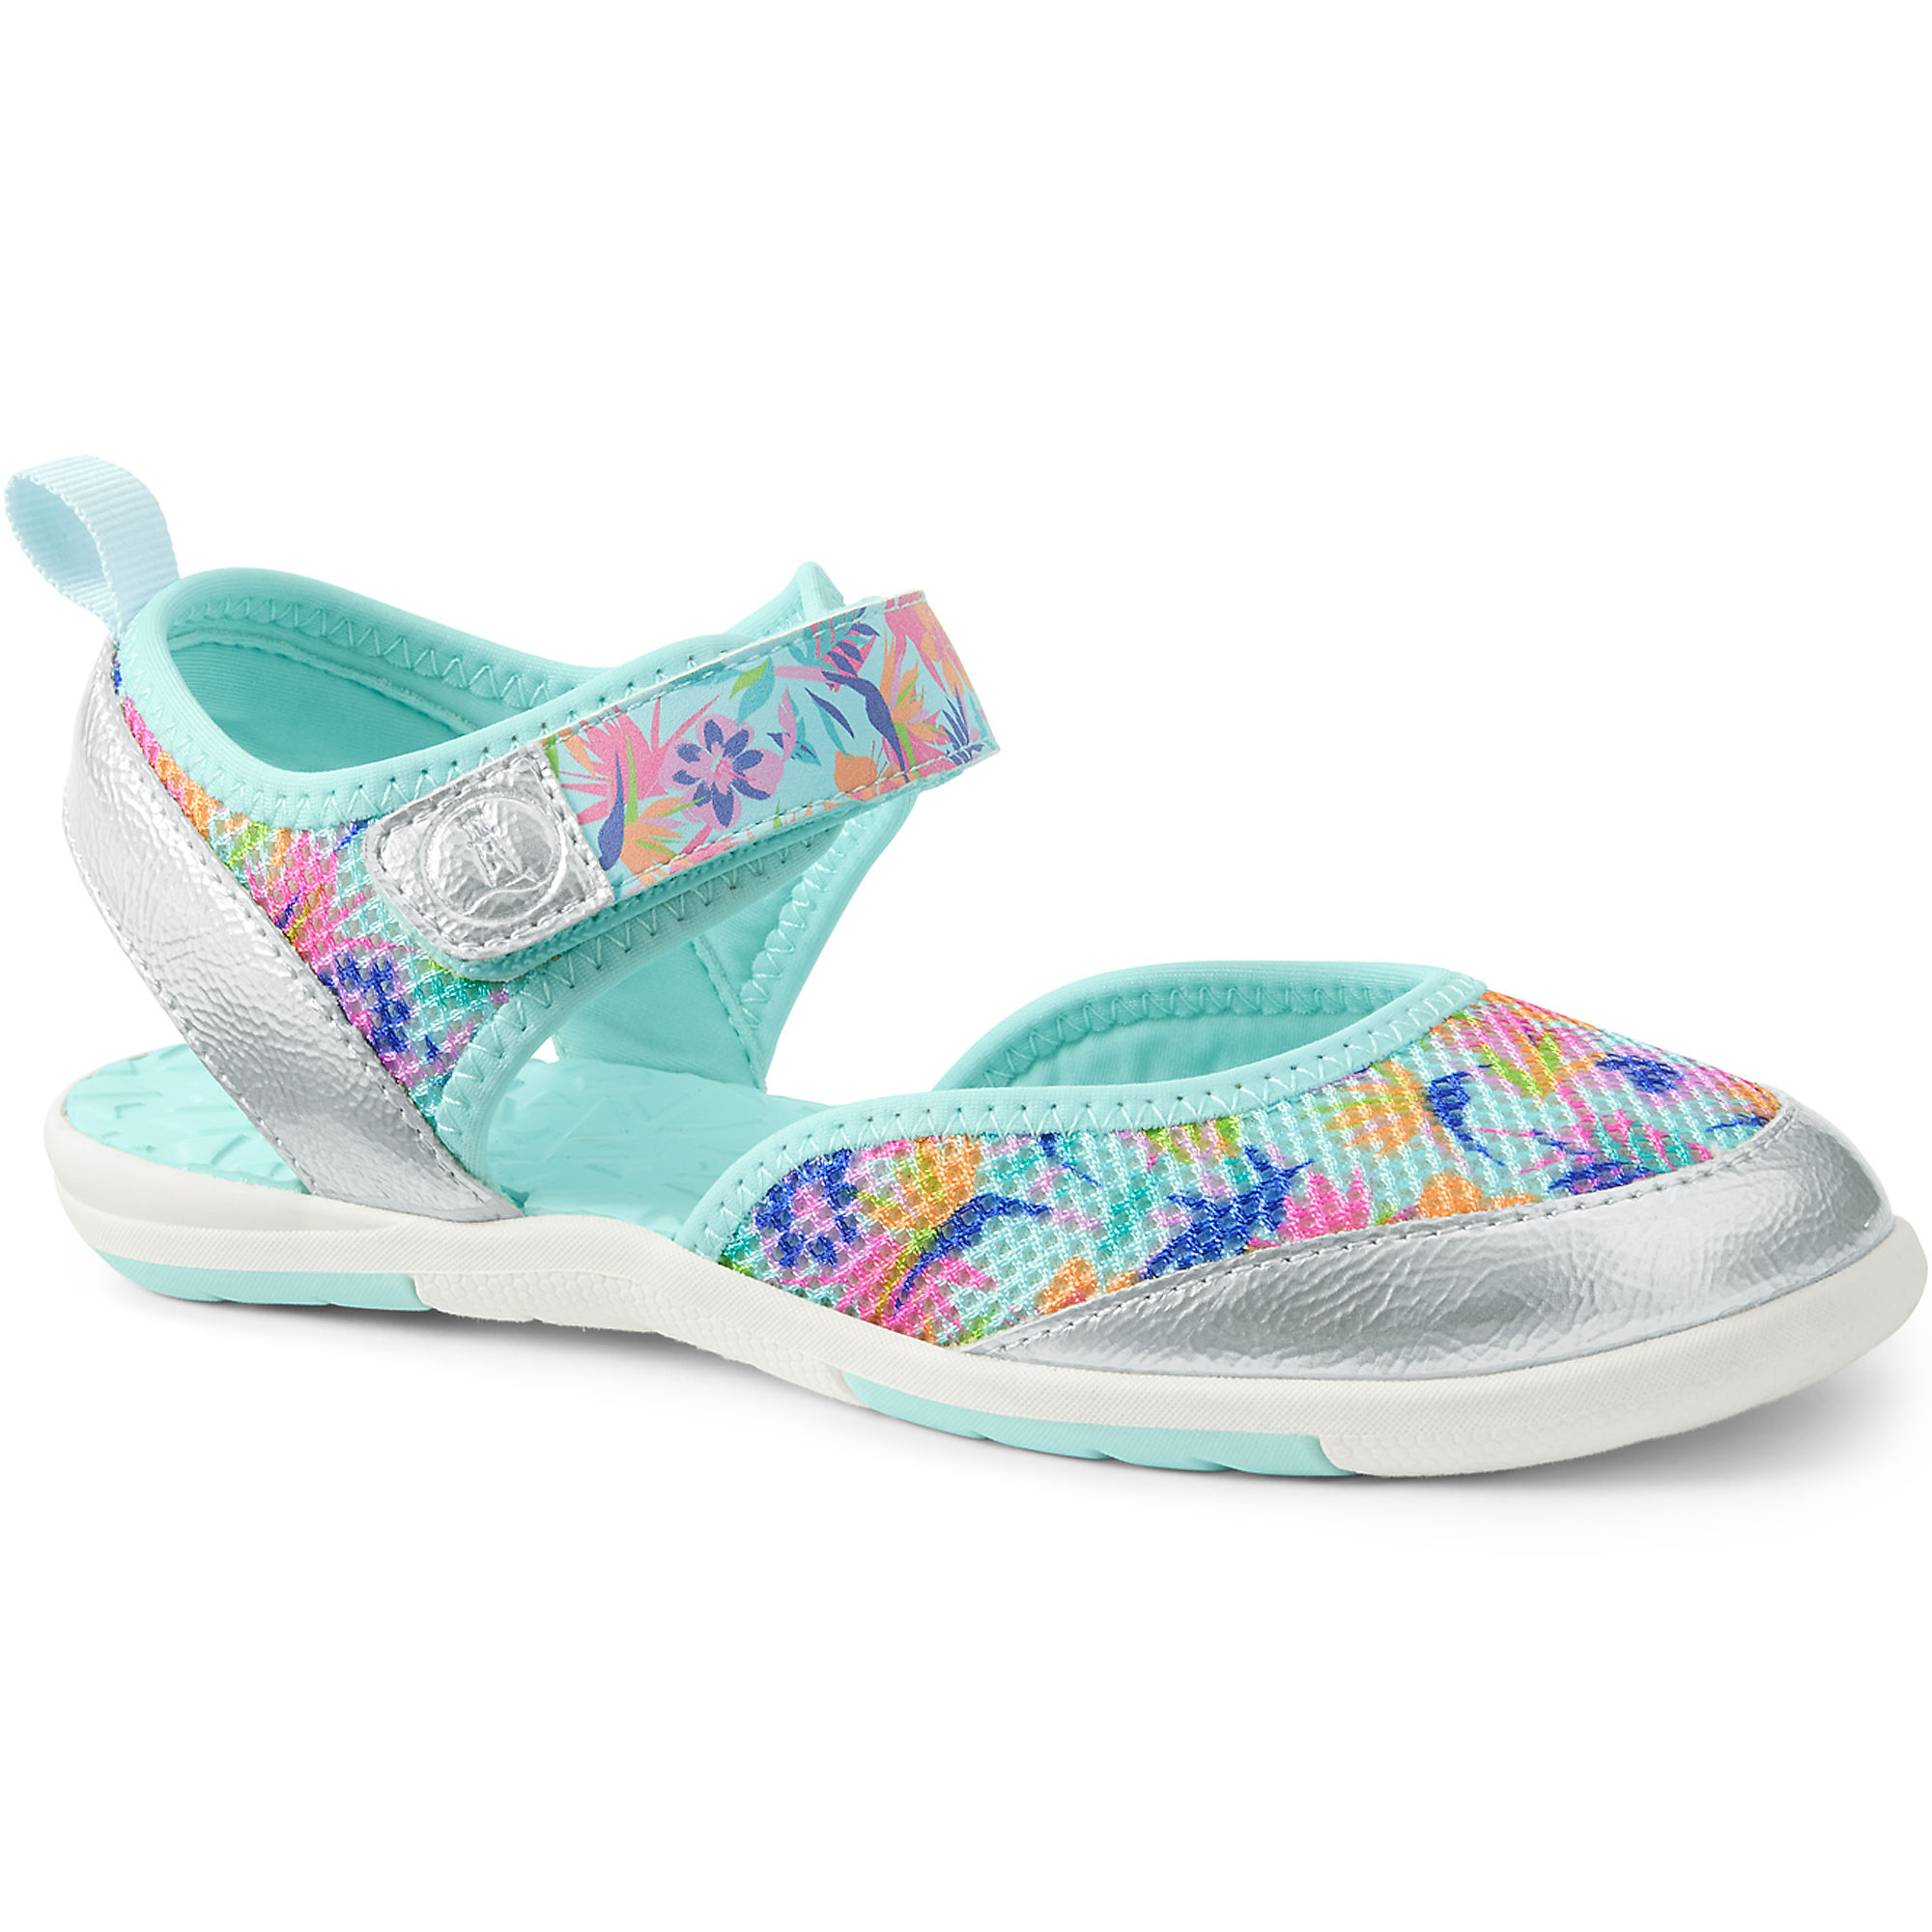 Lands End Girls Mary Jane Water Shoes